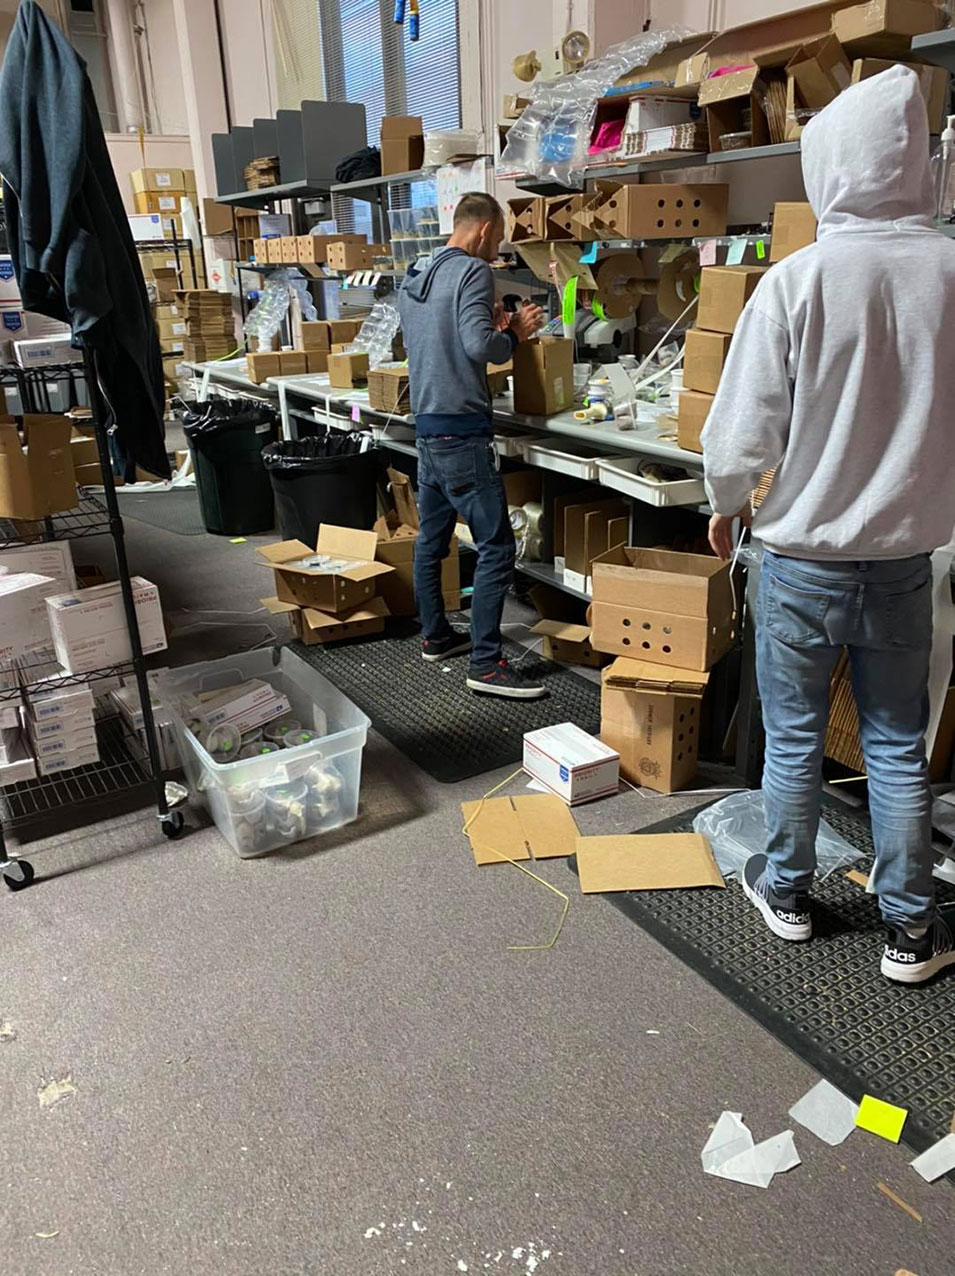 Workers packing boxes for shipment